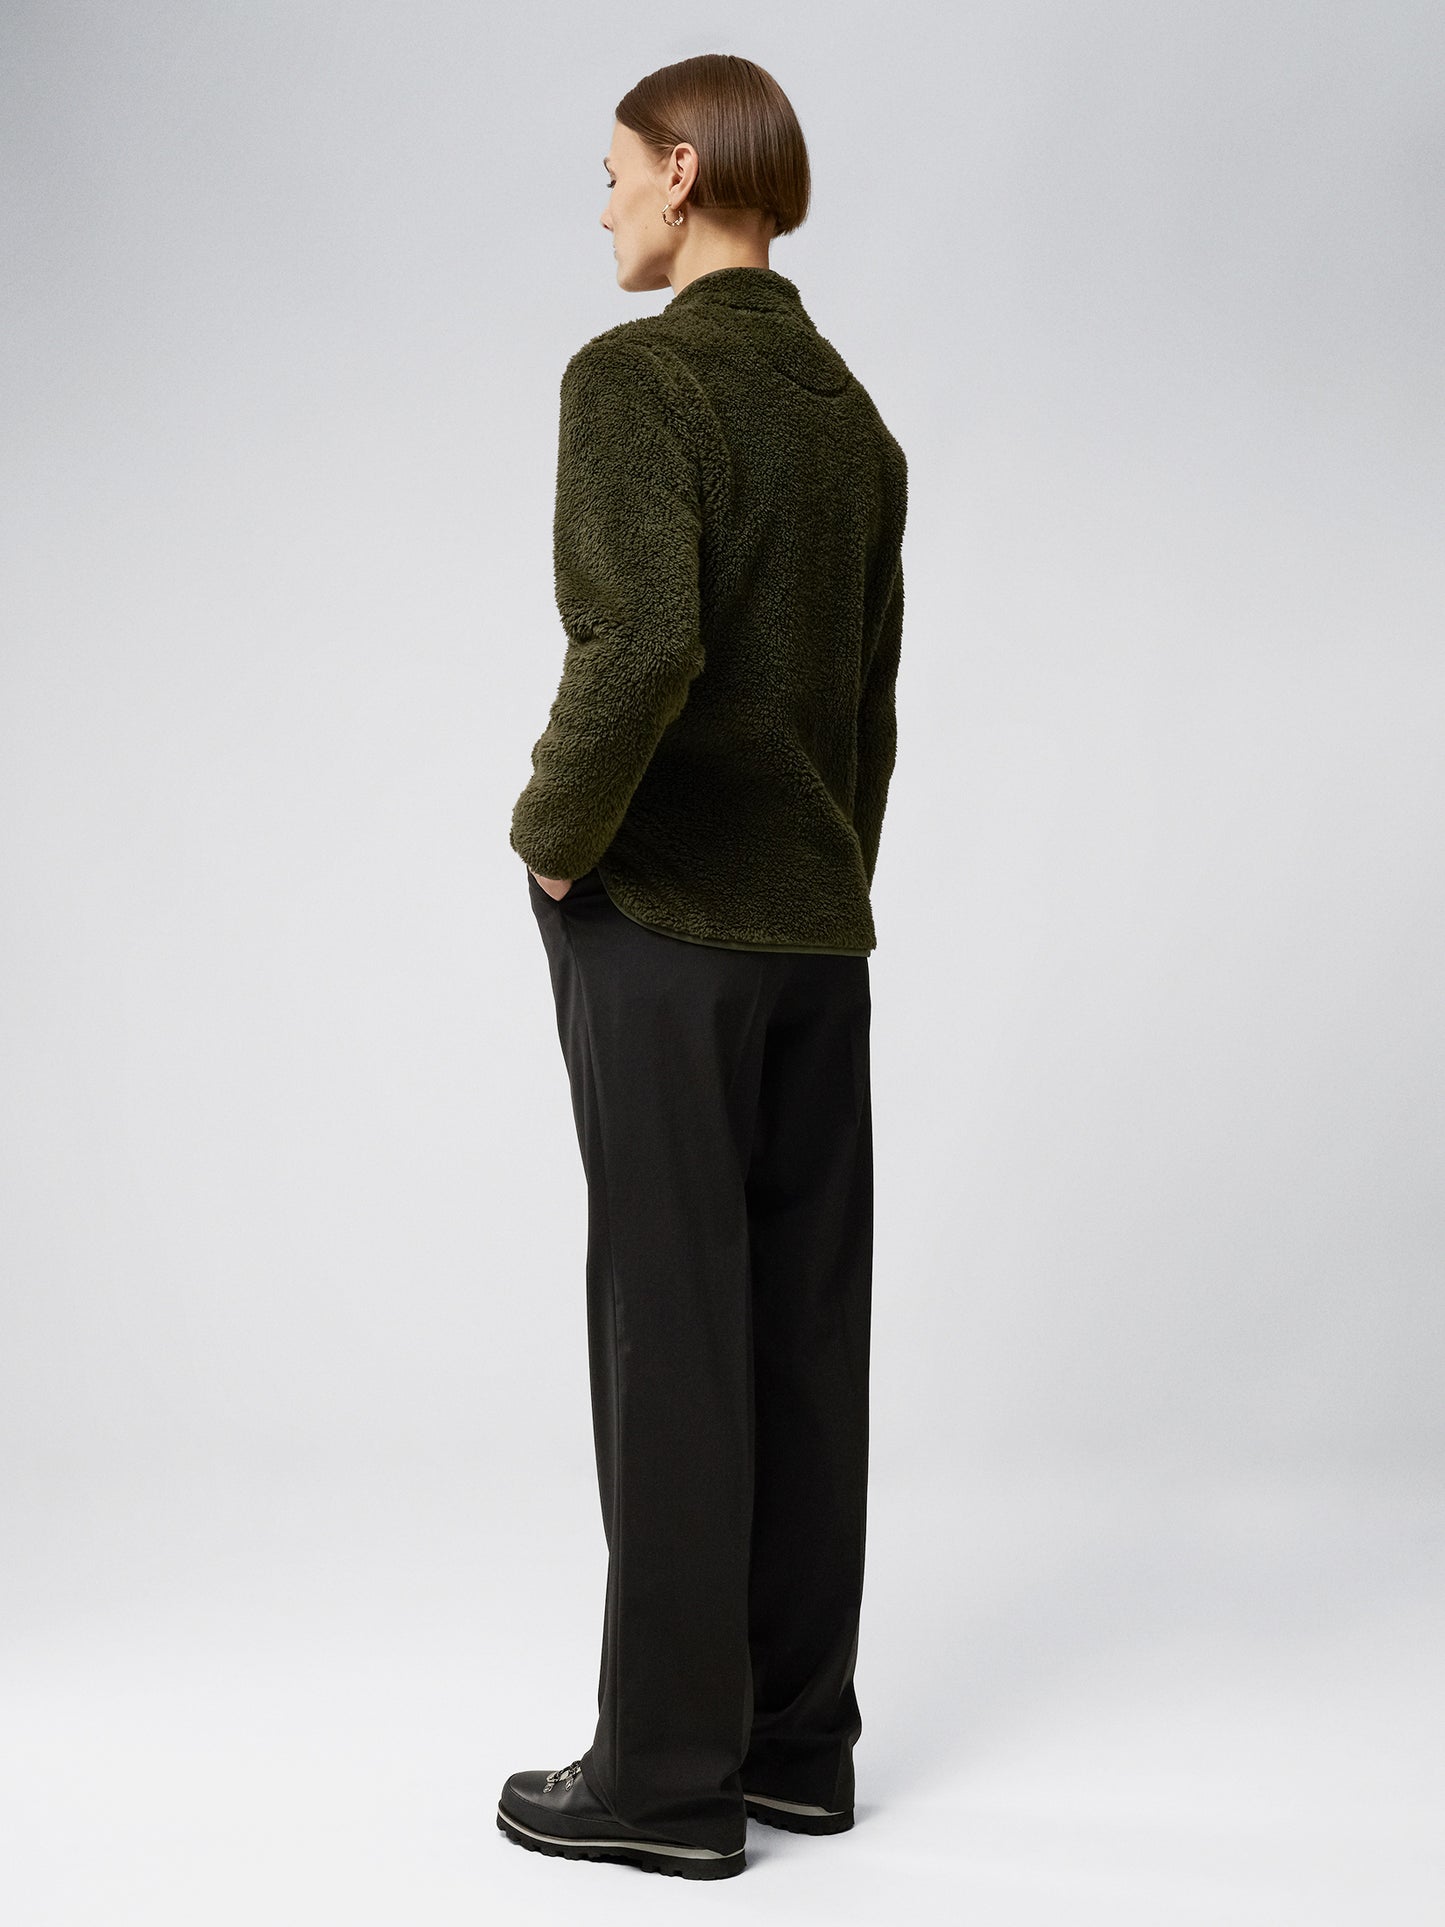 Patricia Pile Fleece Jacket / Forest Green